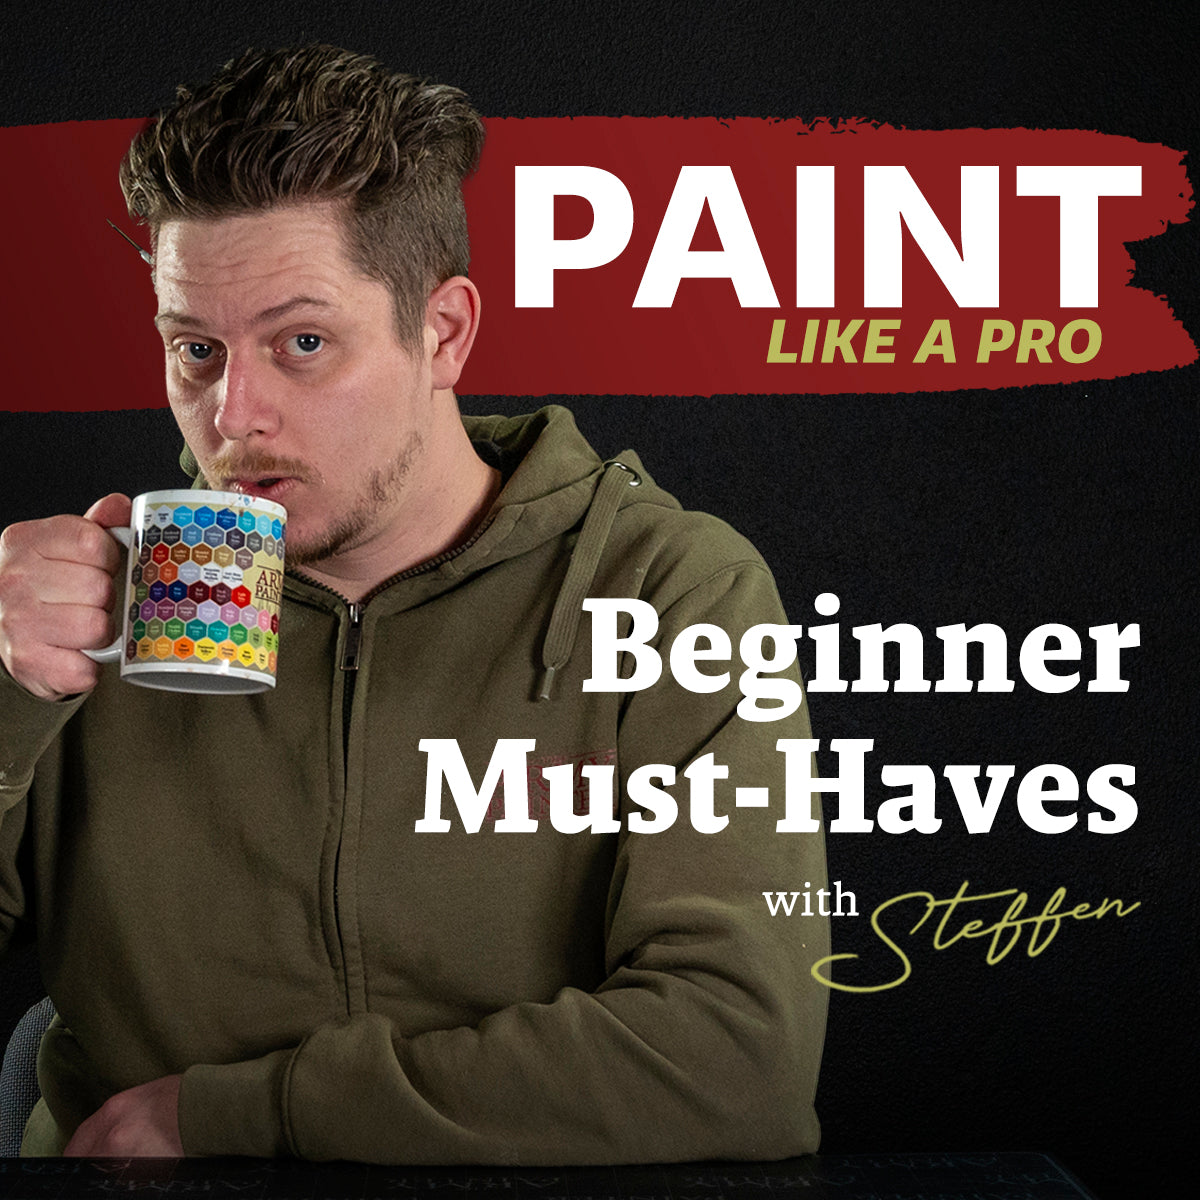 Paint Like a Pro: 10 Tips for Beginner Must-Haves